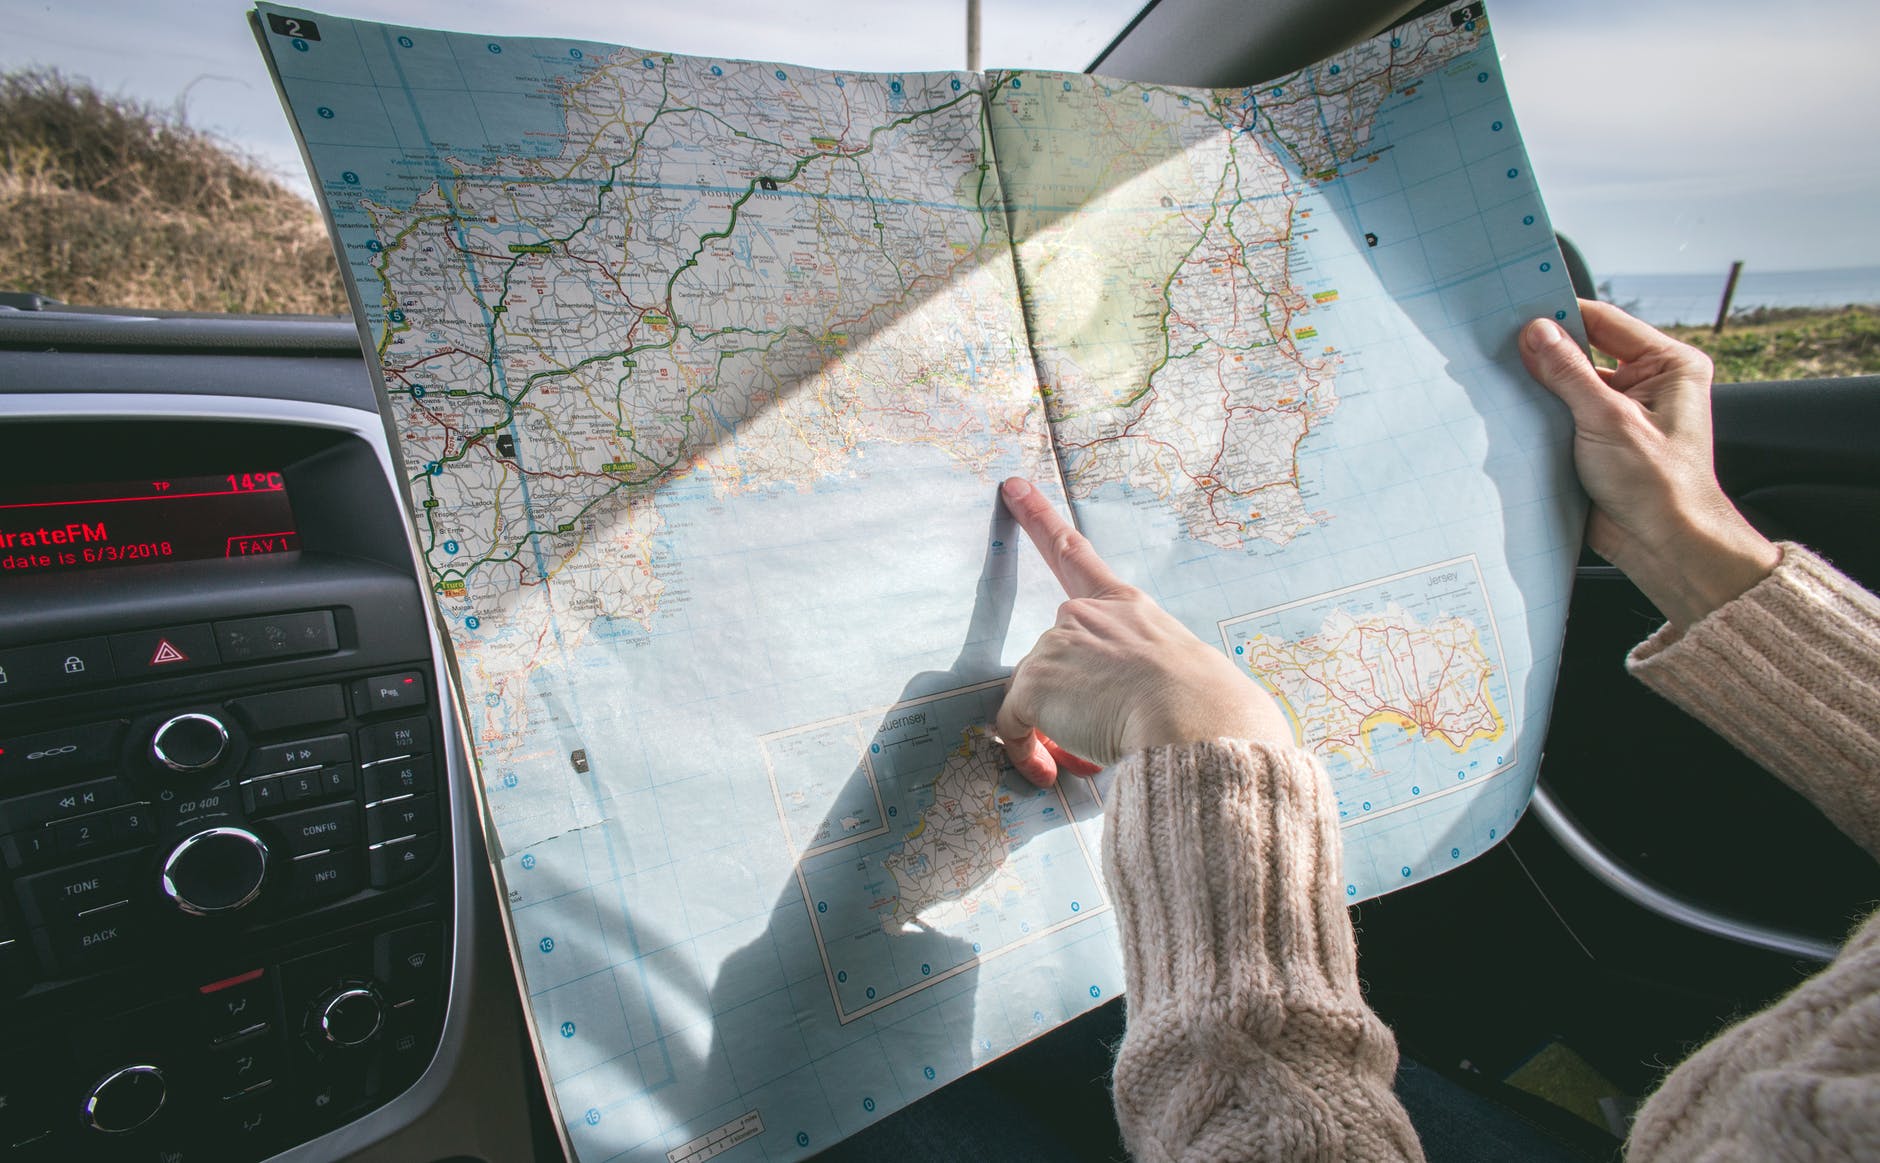 person wearing beige sweater holding map inside vehicle - solo road trips tips from travel experts via Wanderful